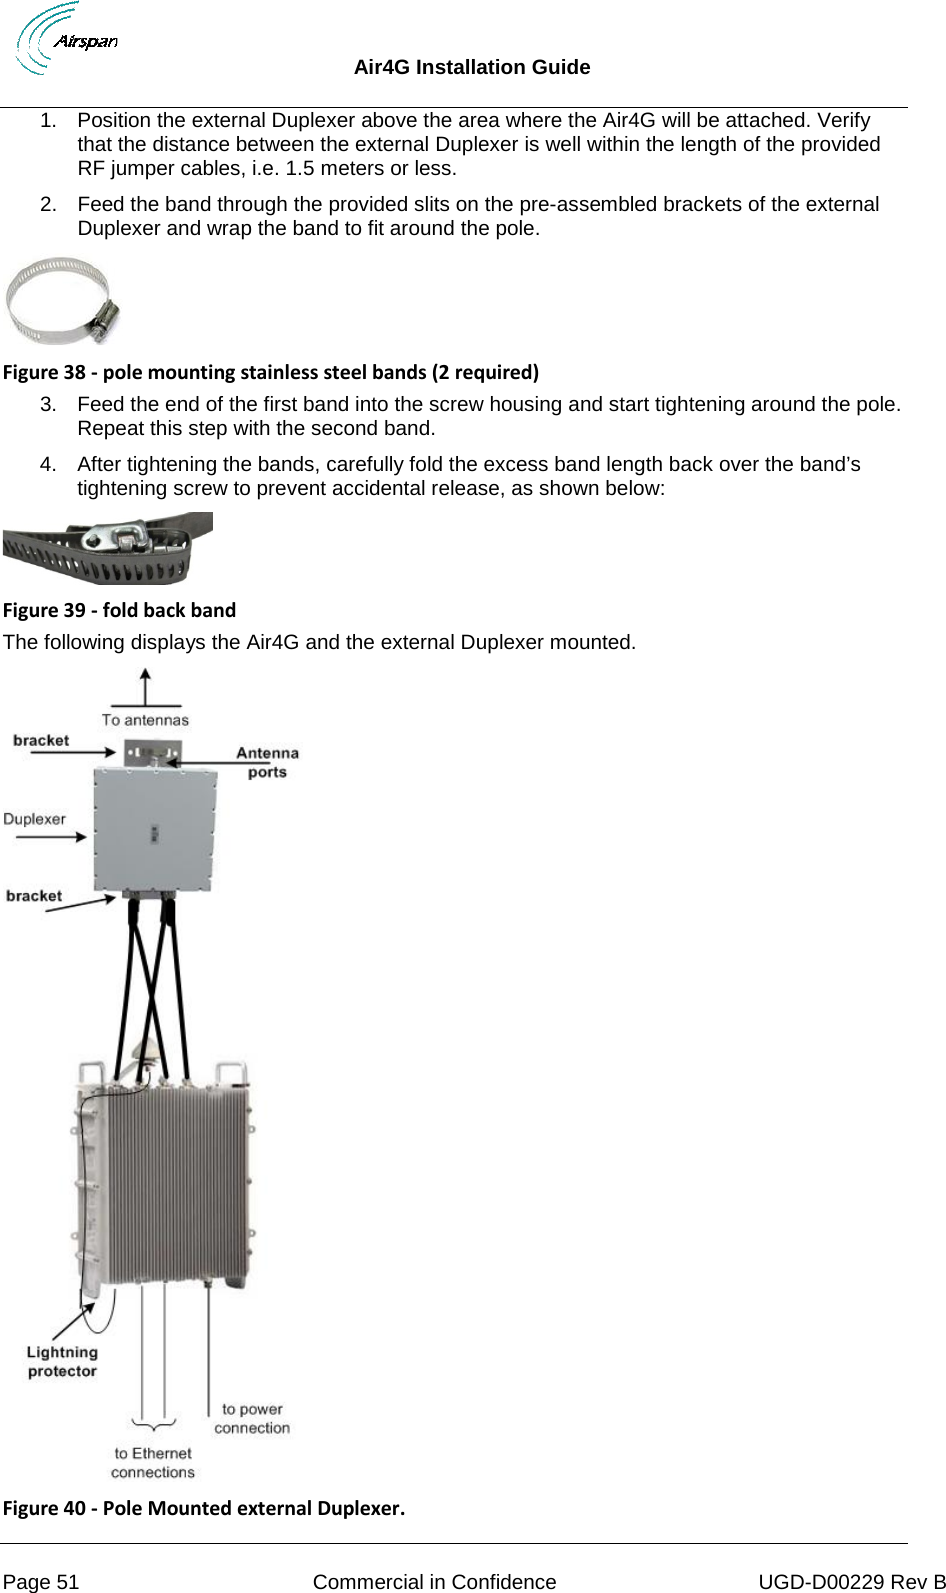  Air4G Installation Guide     Page 51 Commercial in Confidence UGD-D00229 Rev B 1. Position the external Duplexer above the area where the Air4G will be attached. Verify that the distance between the external Duplexer is well within the length of the provided RF jumper cables, i.e. 1.5 meters or less. 2. Feed the band through the provided slits on the pre-assembled brackets of the external Duplexer and wrap the band to fit around the pole.  Figure 38 - pole mounting stainless steel bands (2 required) 3. Feed the end of the first band into the screw housing and start tightening around the pole. Repeat this step with the second band.  4. After tightening the bands, carefully fold the excess band length back over the band’s tightening screw to prevent accidental release, as shown below:  Figure 39 - fold back band The following displays the Air4G and the external Duplexer mounted.  Figure 40 - Pole Mounted external Duplexer. 